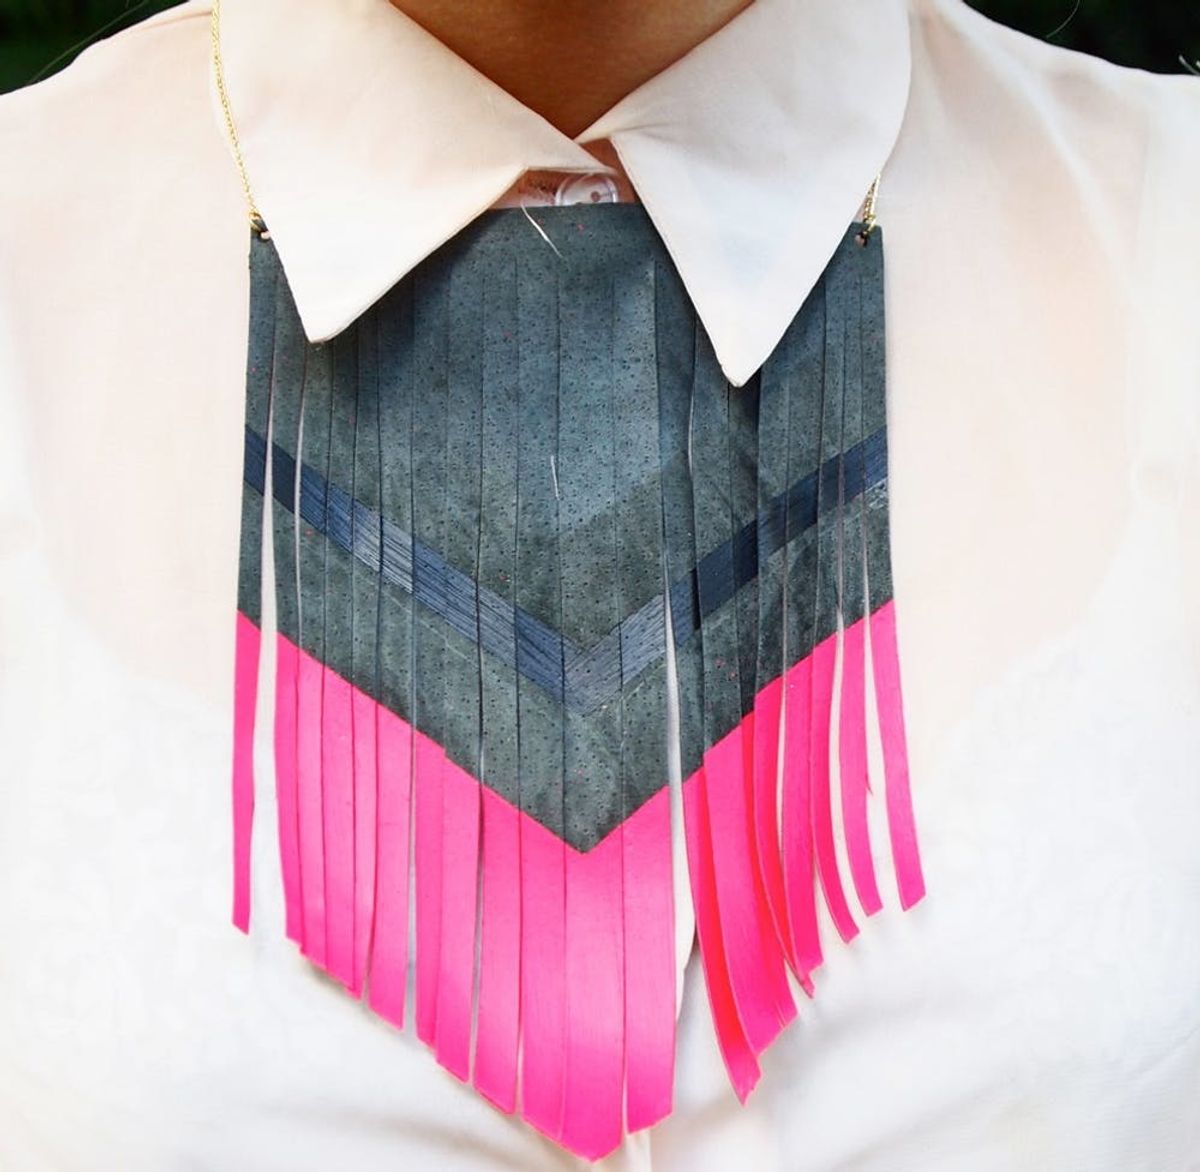 32 Ways to Make Your Own Leather Jewelry